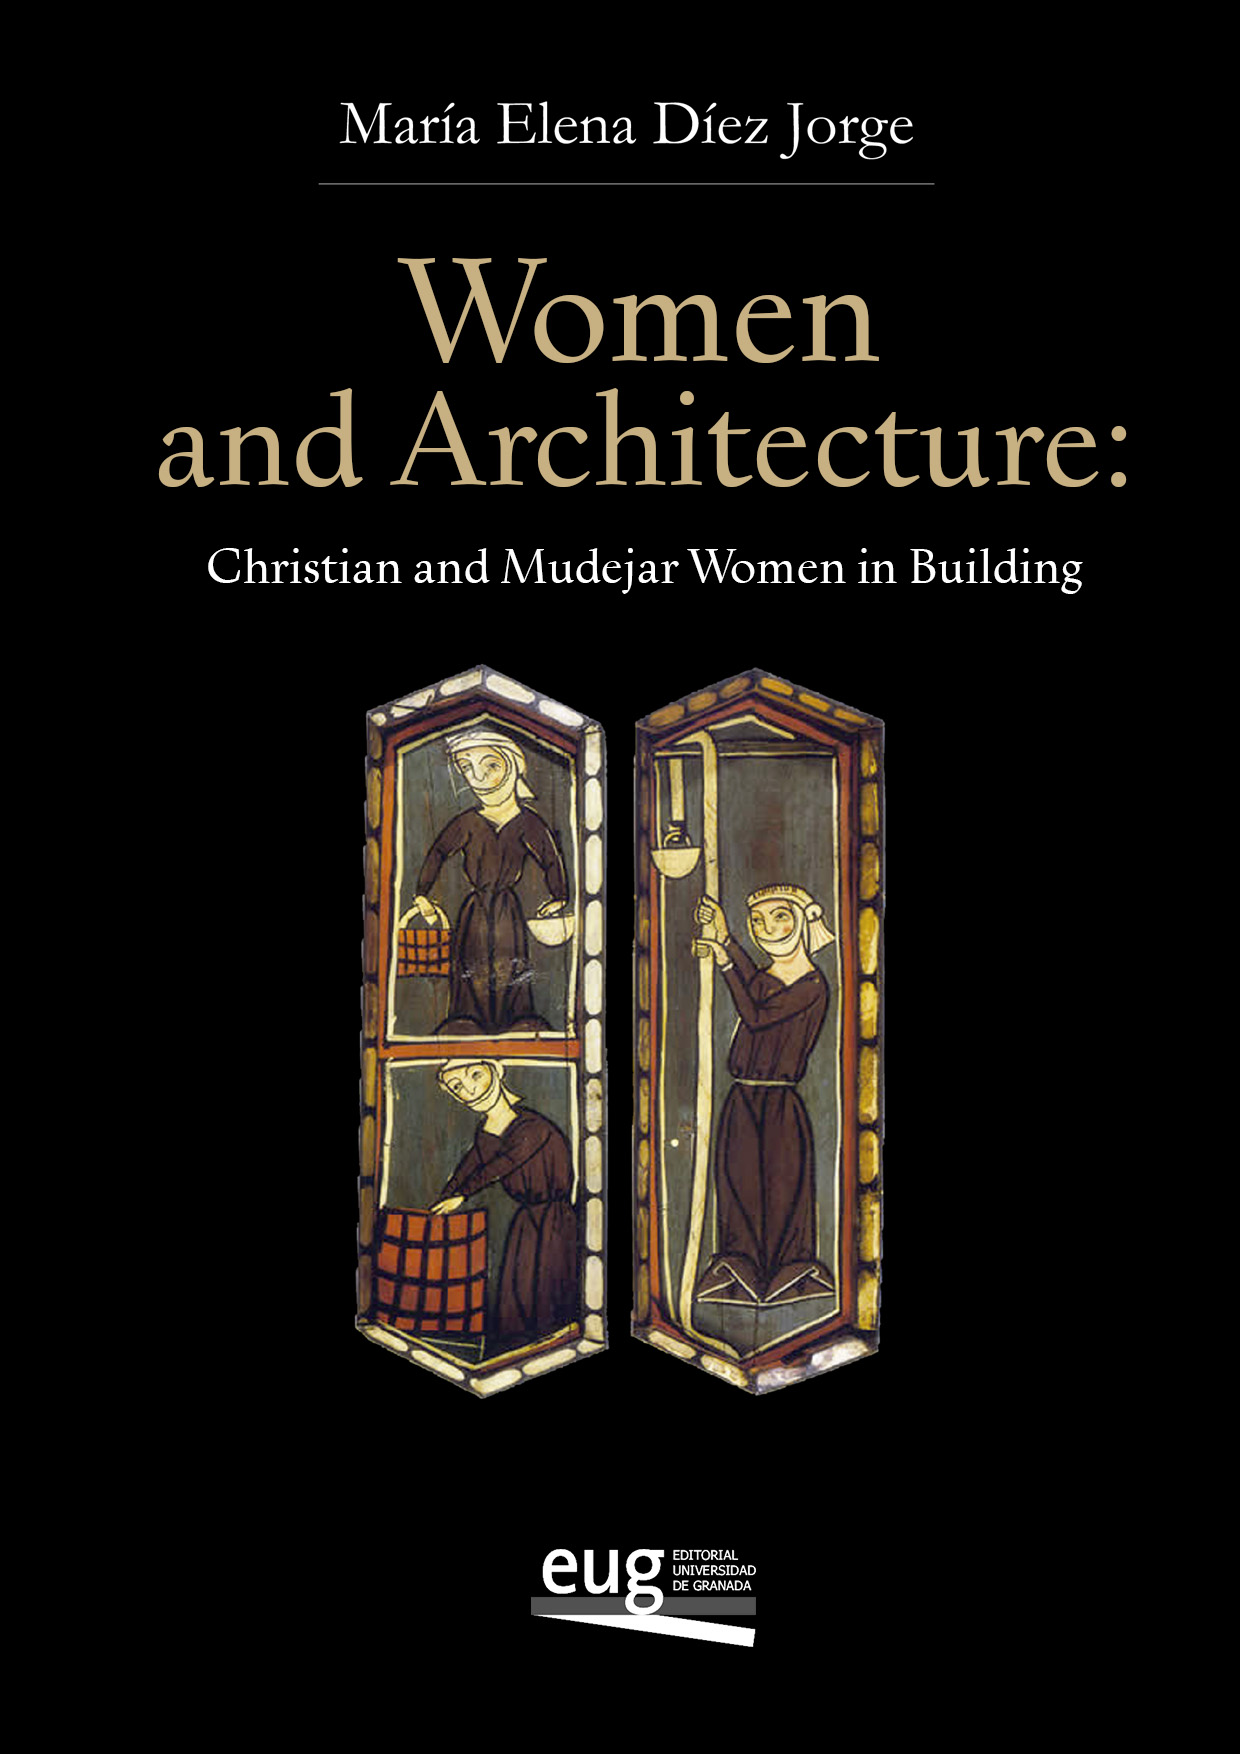 Women and Architecture: Christian and Mudejar Women in Building